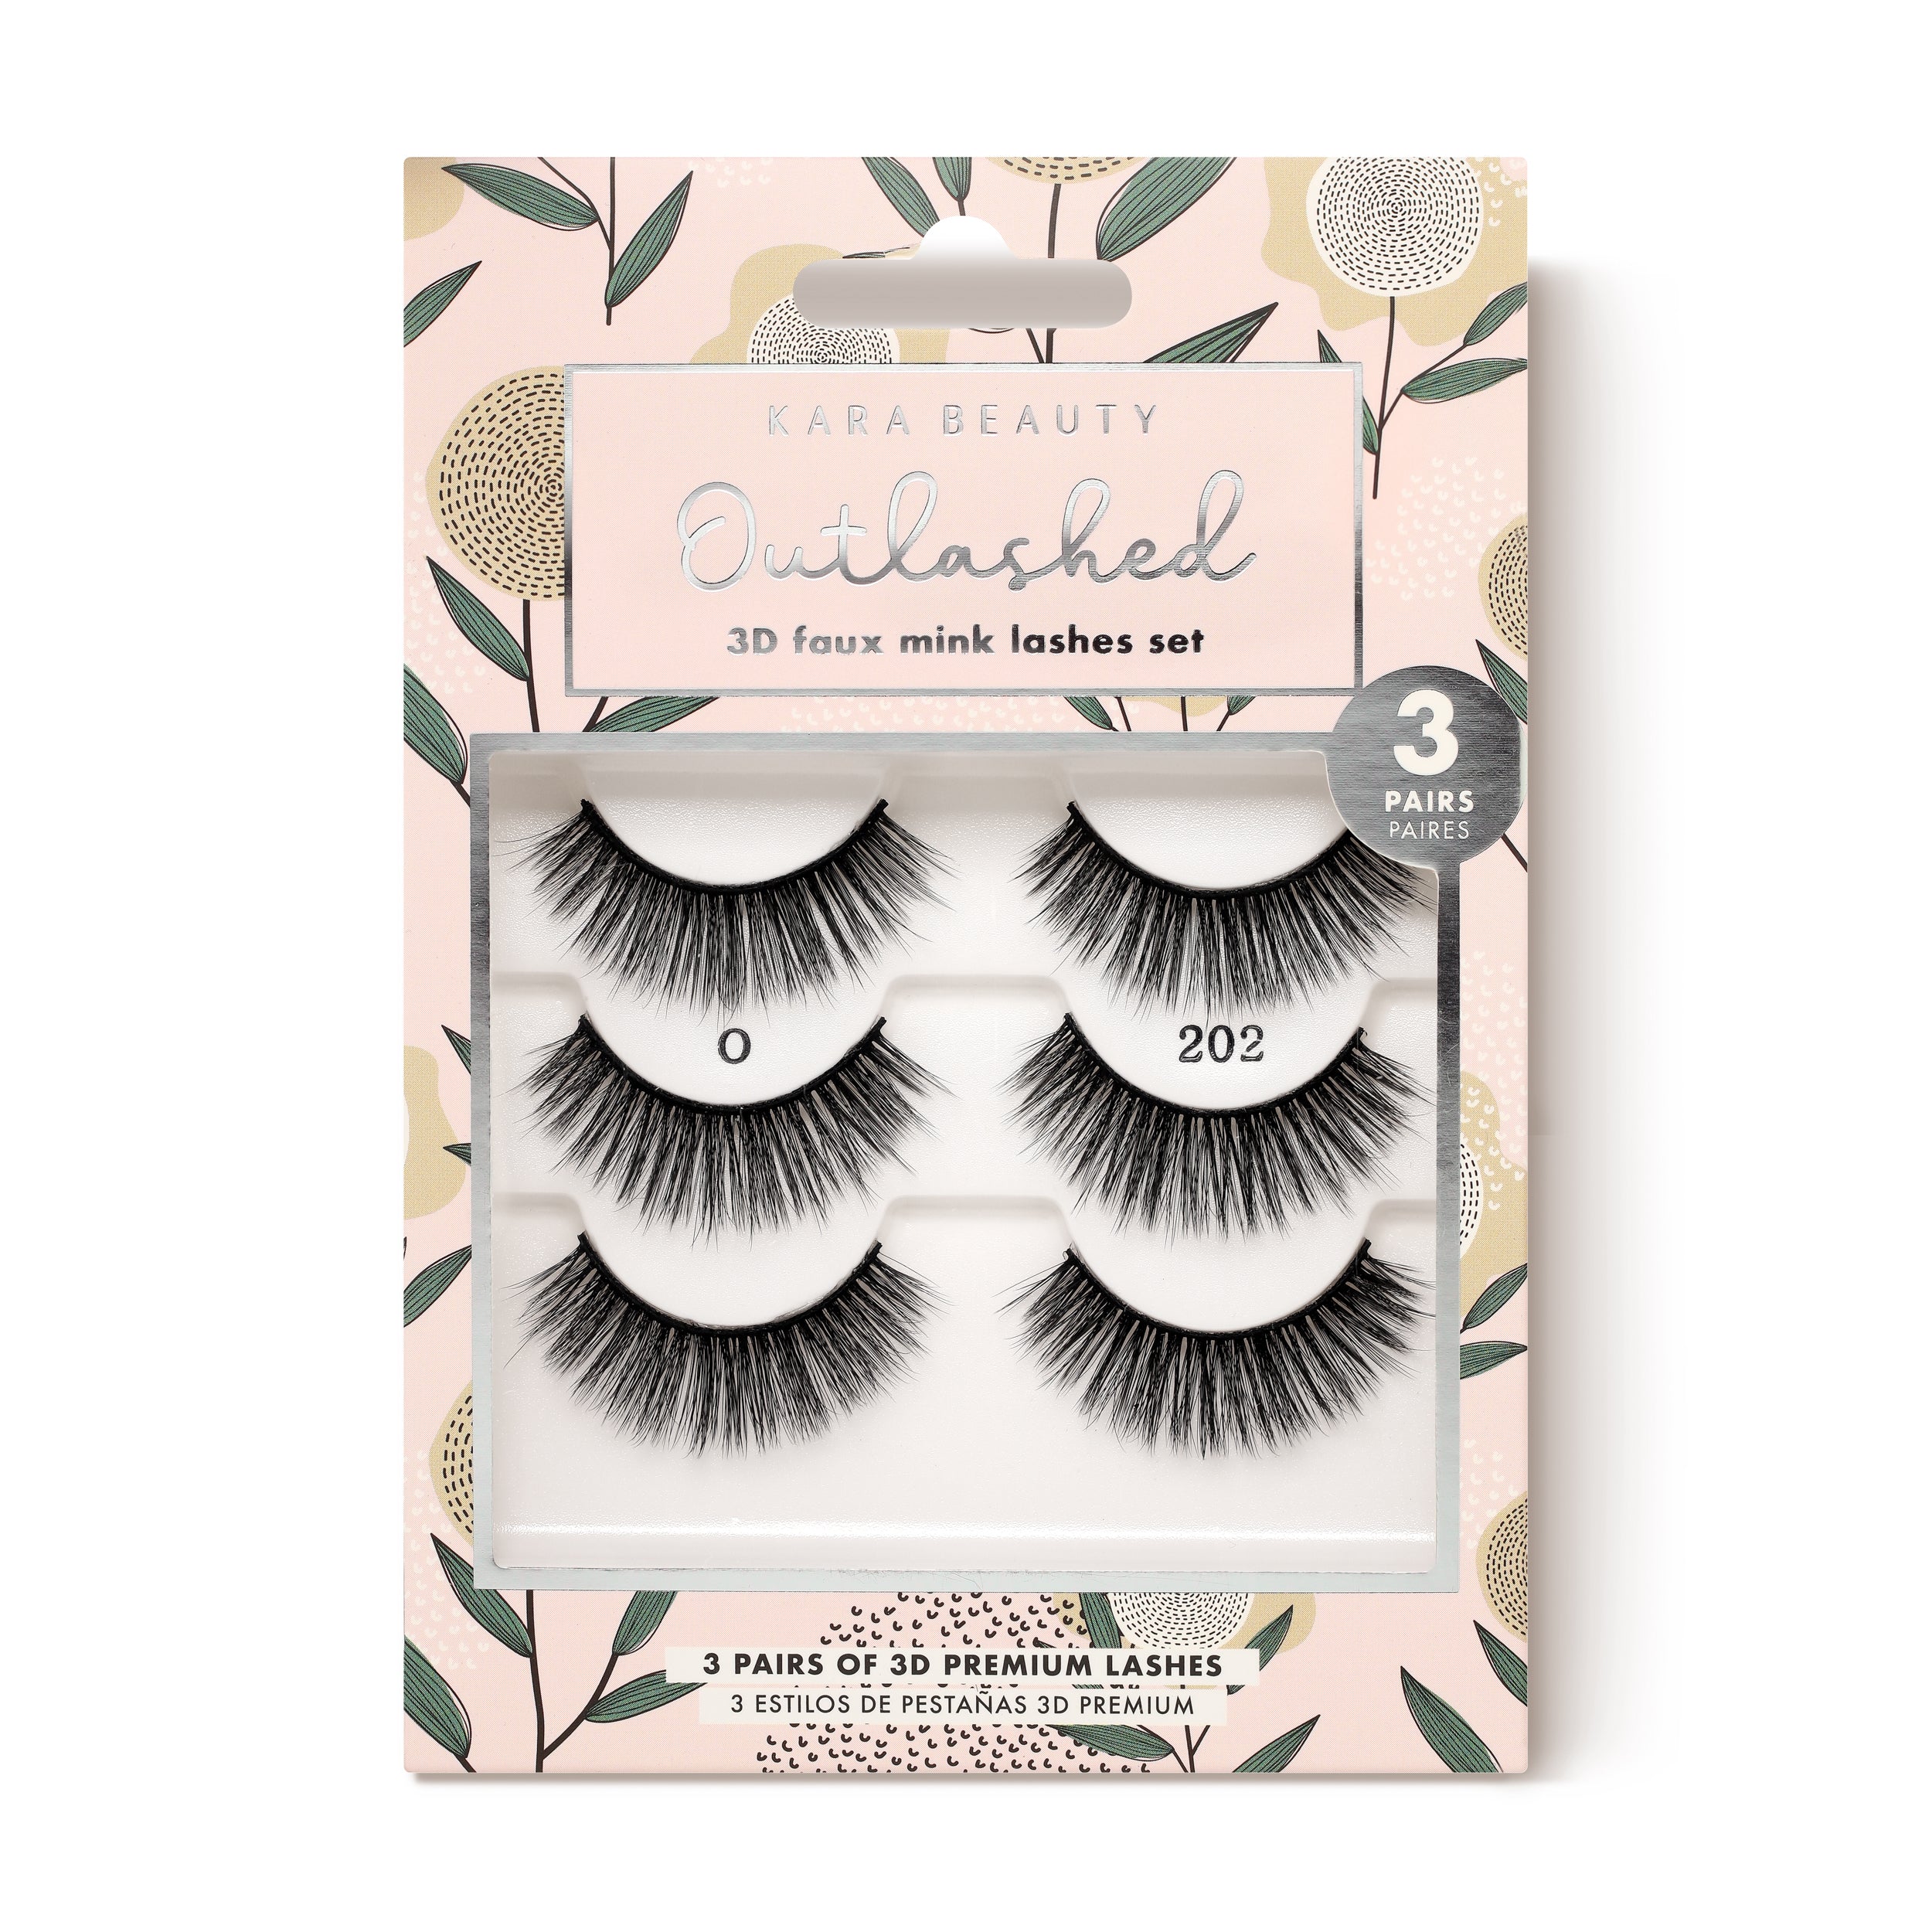 KL3202 OUTLASHED 3D Faux Mink Lashes 3 PAIRS